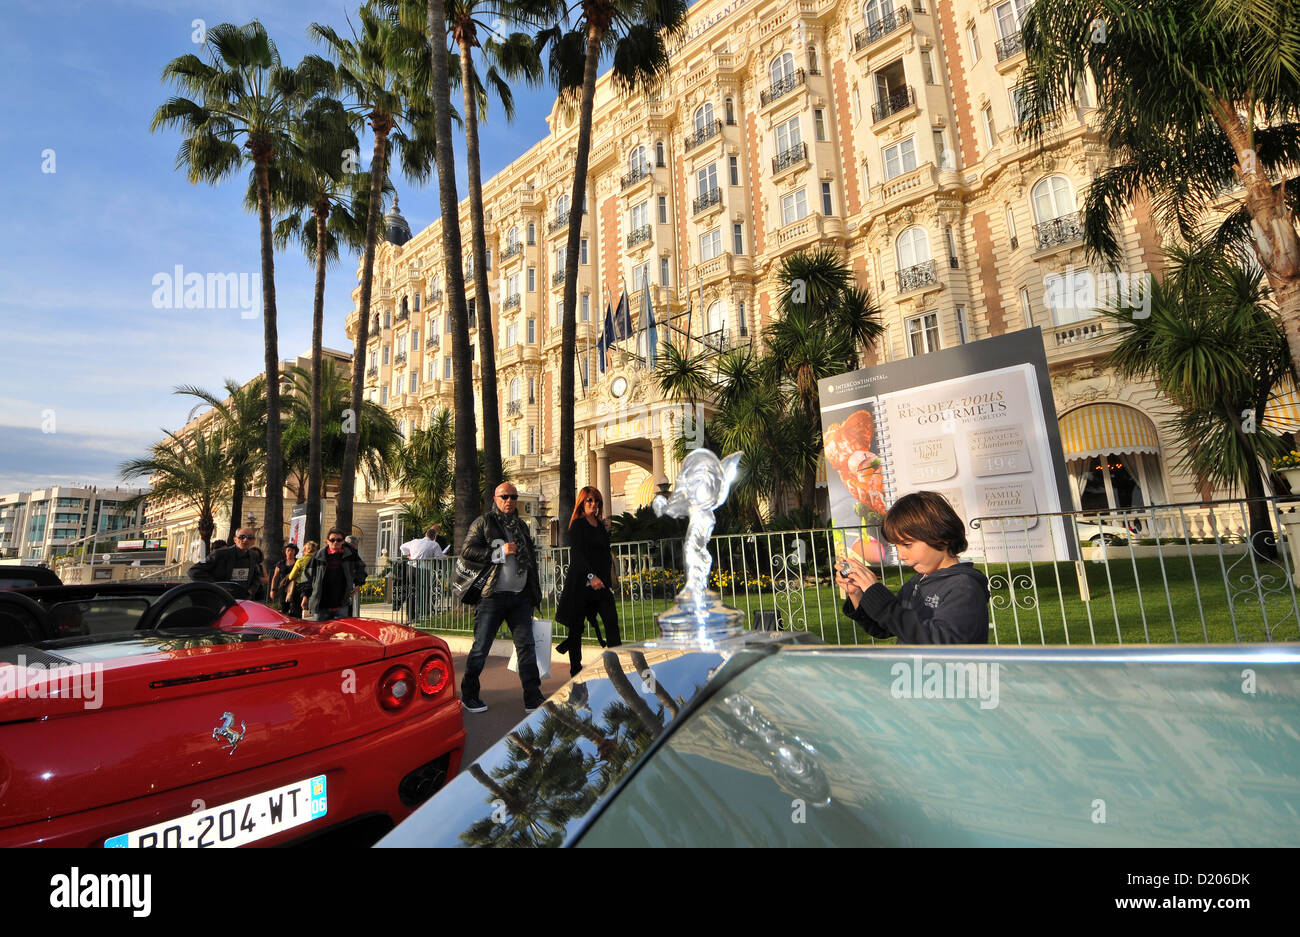 Cars and people in front of Carlton hotel, Cannes, Cote d'Azur, South France, Europe Stock Photo